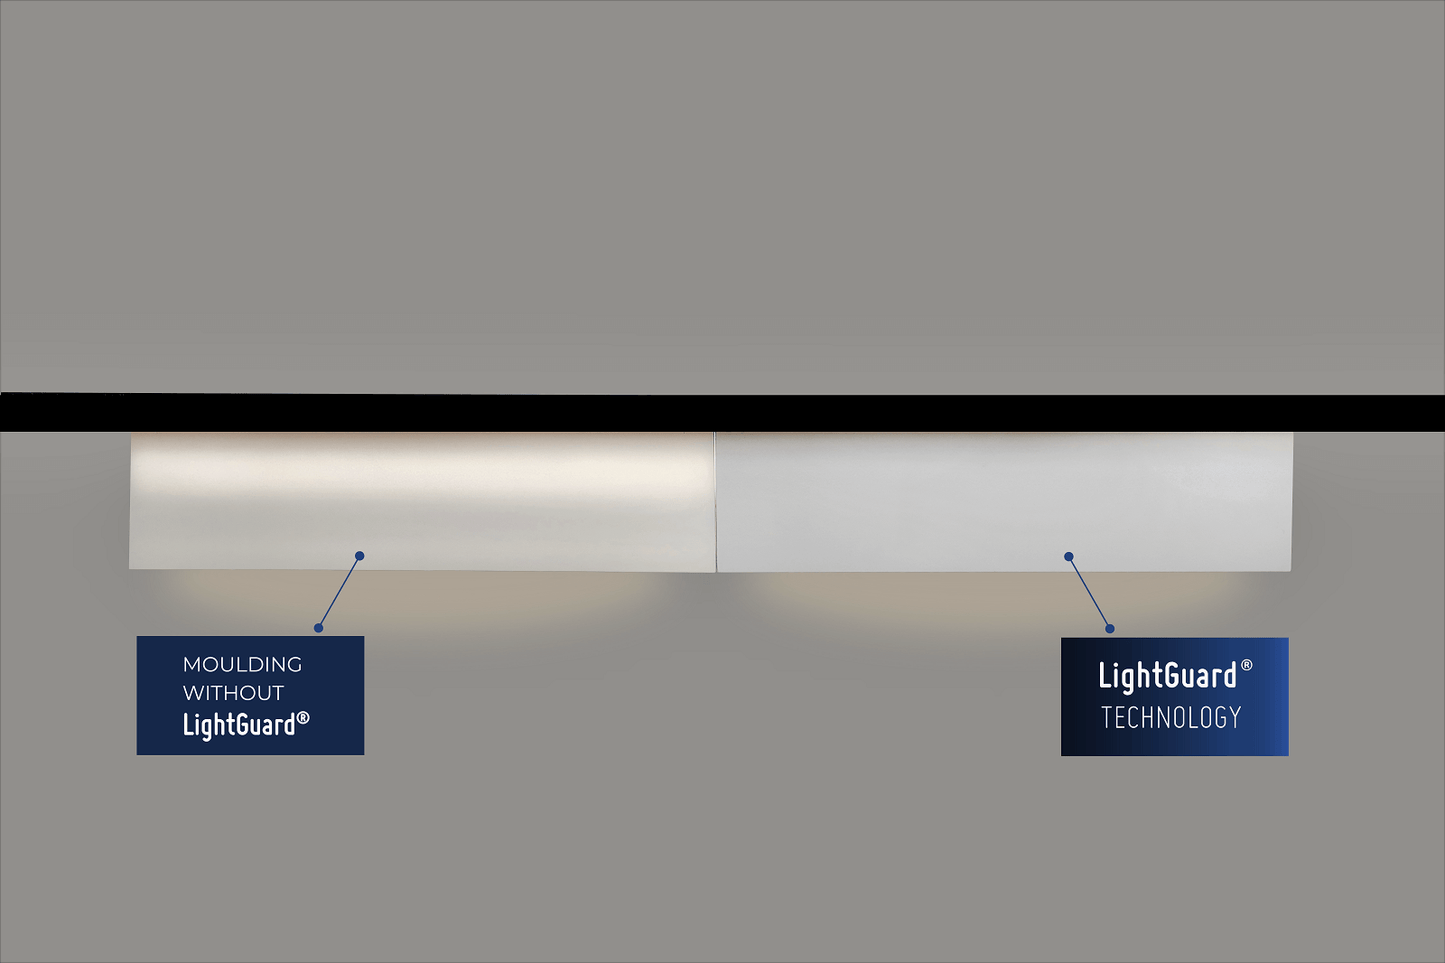 Showcasing the difference between moulding with, and without, LightGuard